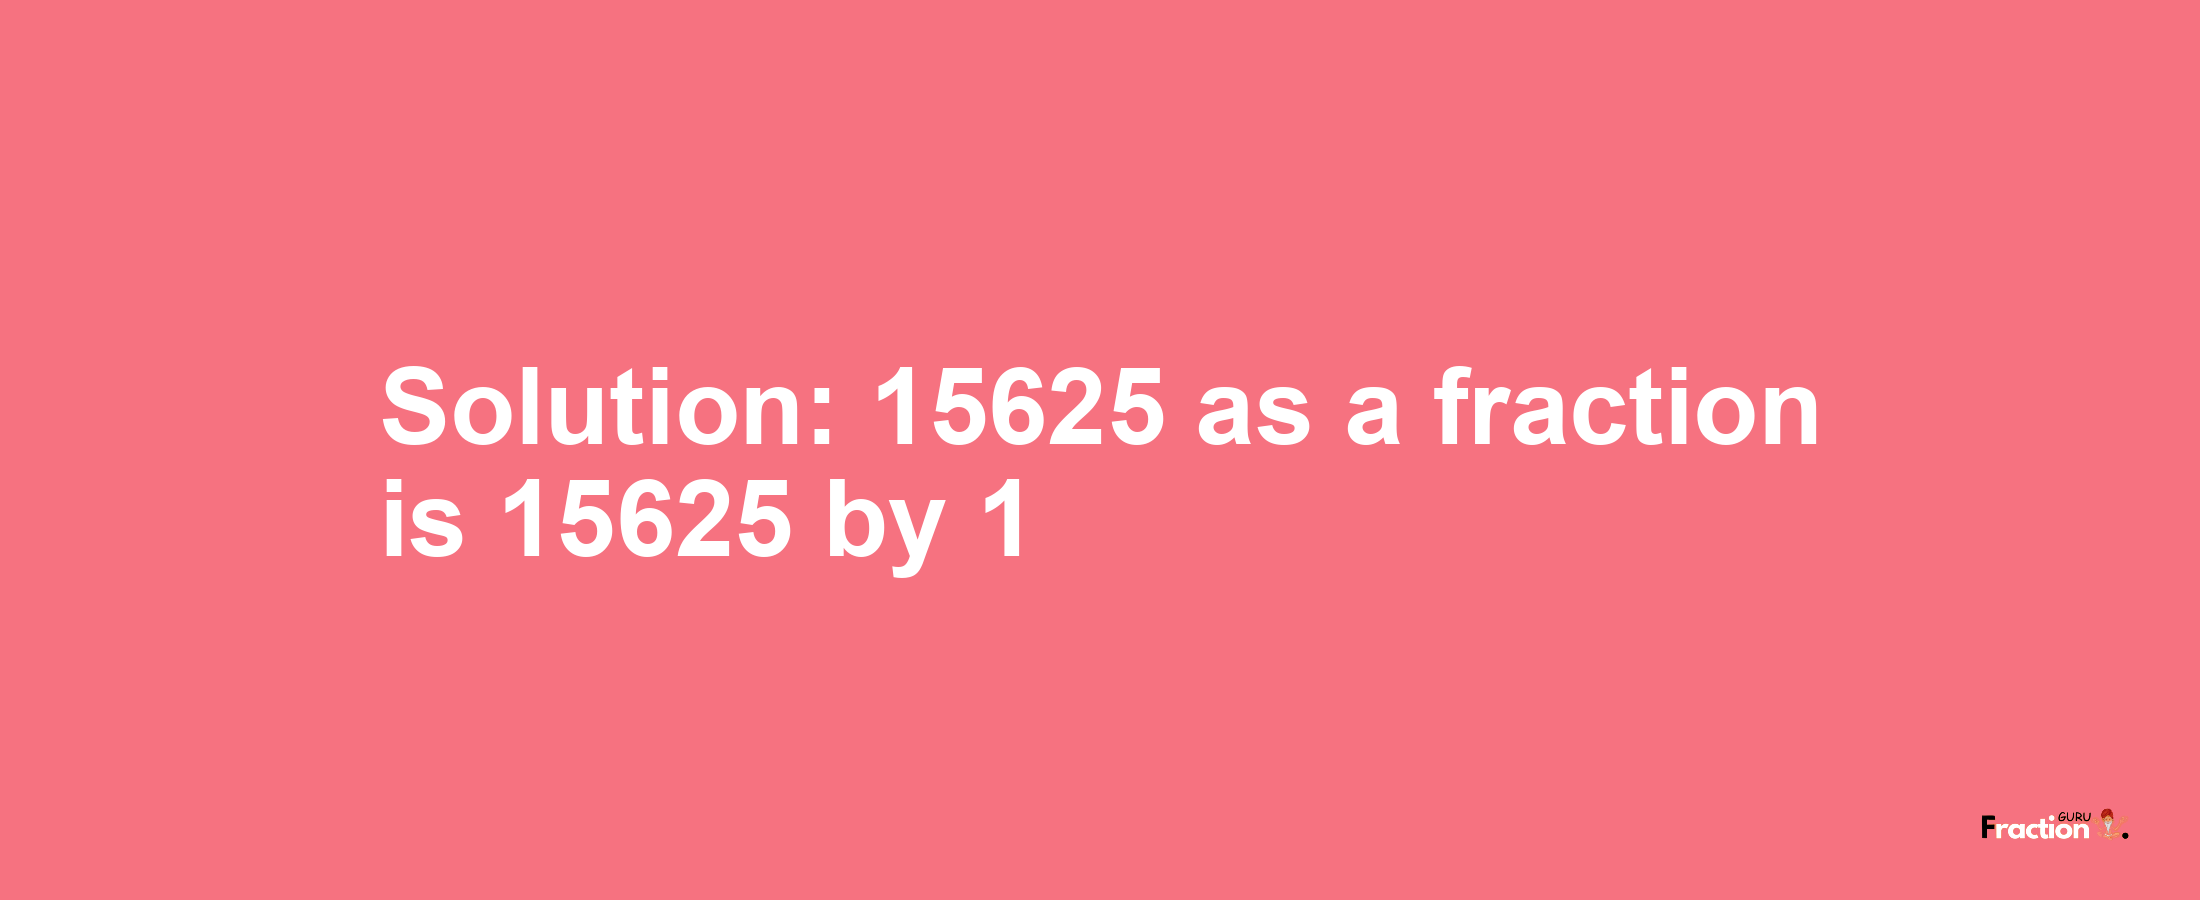 Solution:15625 as a fraction is 15625/1